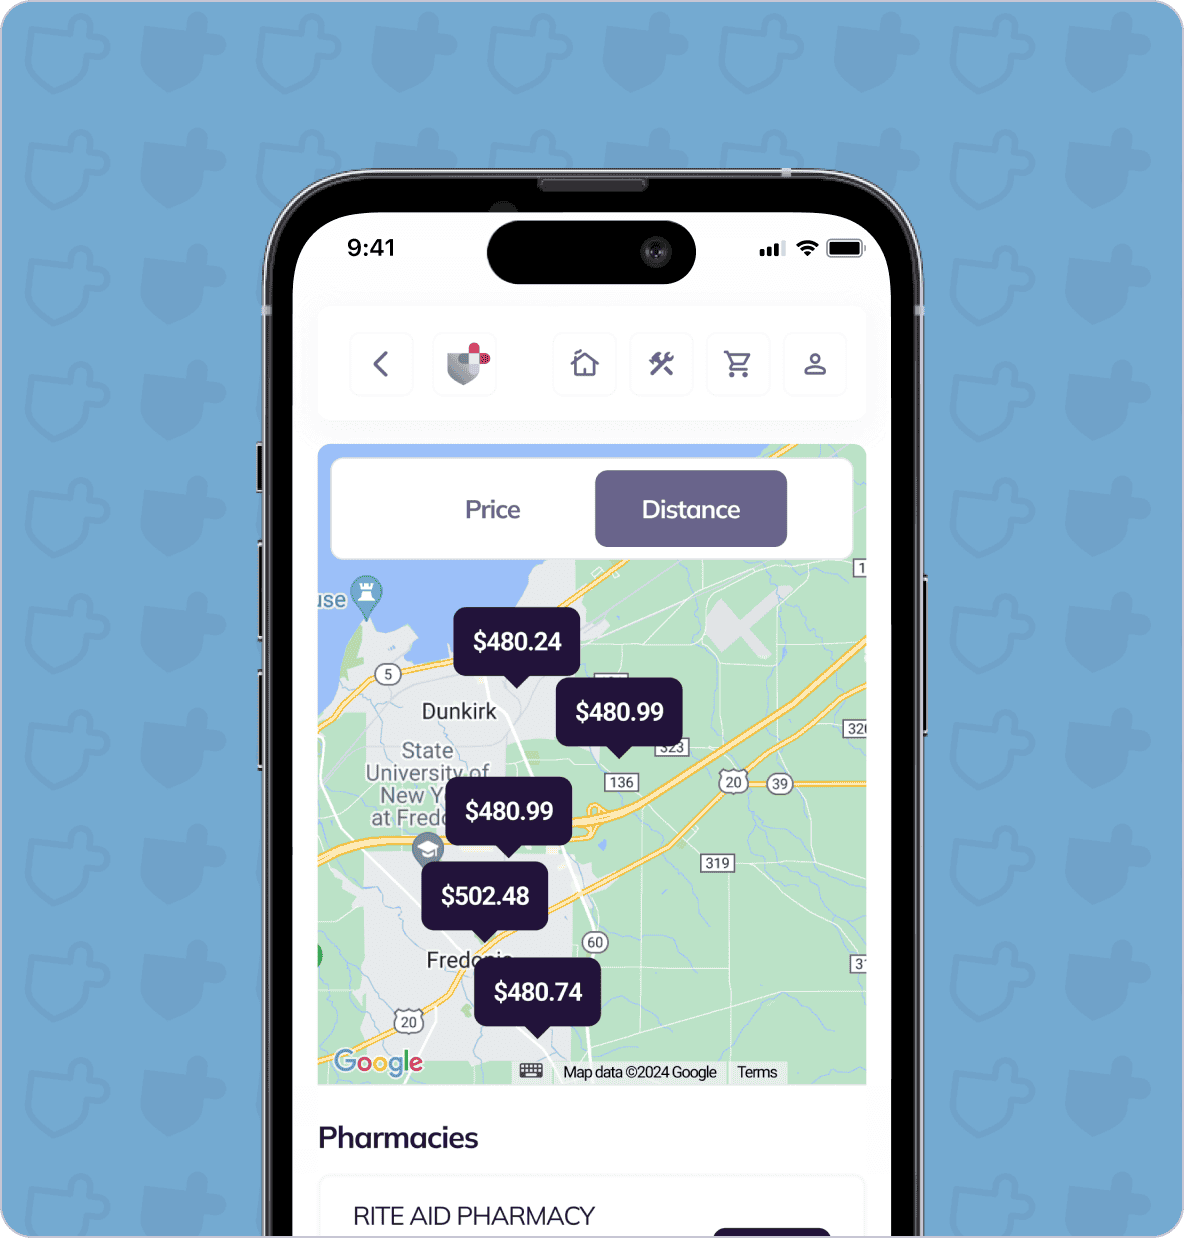 A smartphone screen shows a map with highlighted pharmacy locations and corresponding medication prices, all close to $480.24. The interface allows toggling options for Price and Distance.